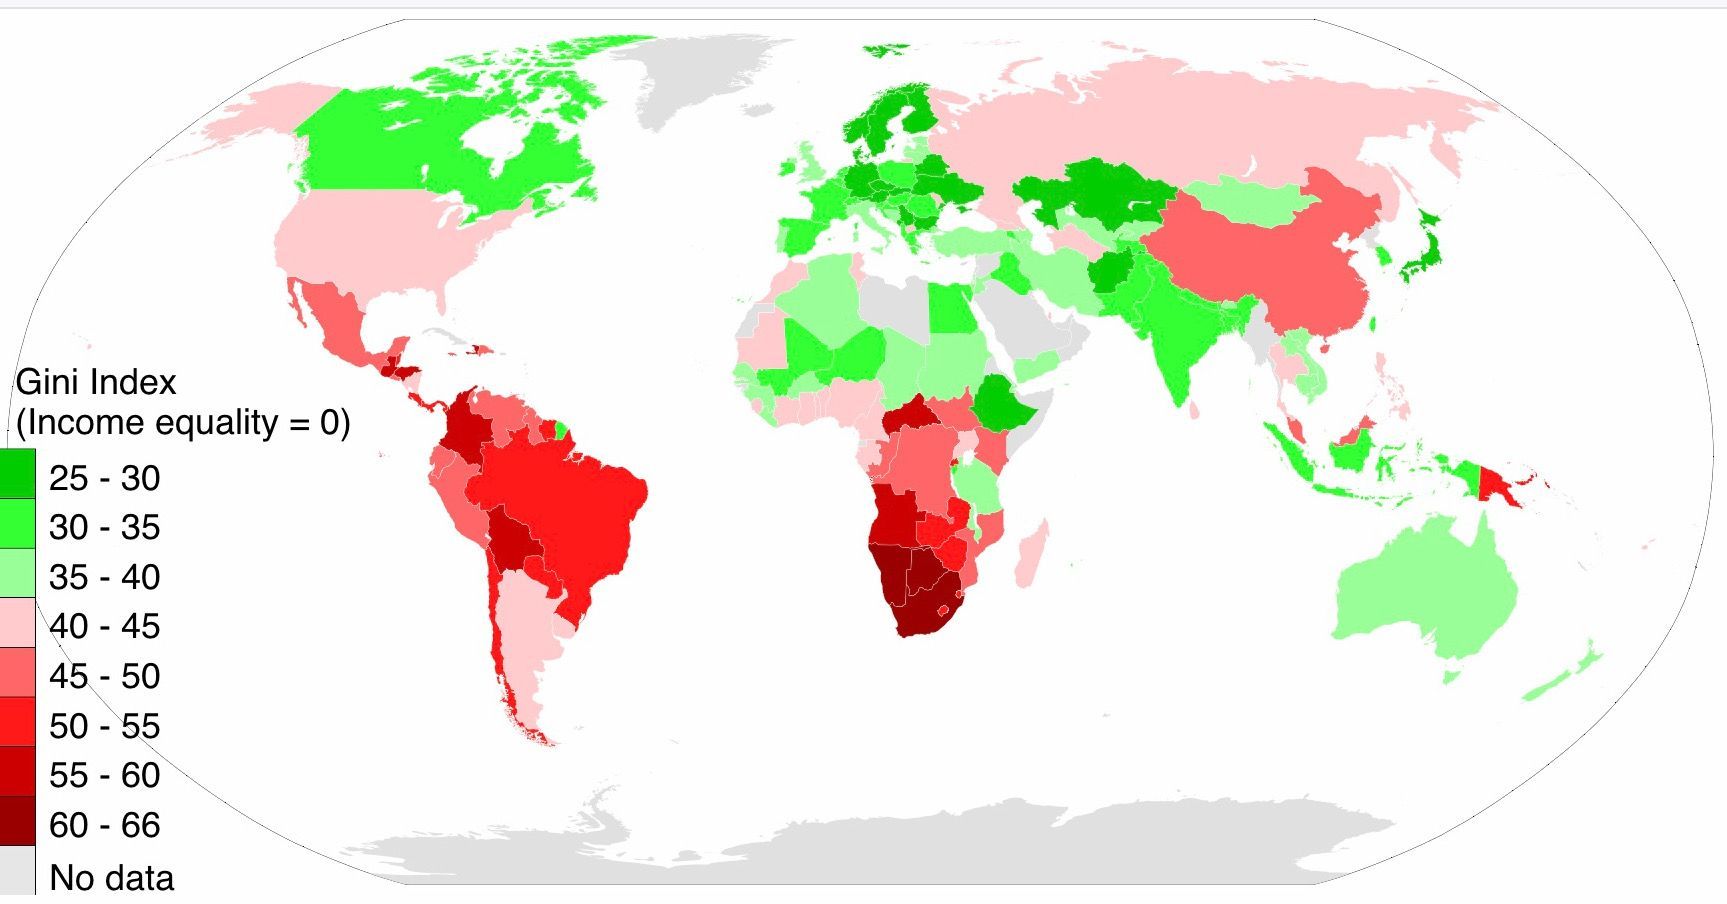 https://upload.wikimedia.org/wikipedia/commons/archive/0/0c/20191210171957!2014_Gini_Index_World_Map,_income_inequality_distribution_by_country_per_World_Bank.svg